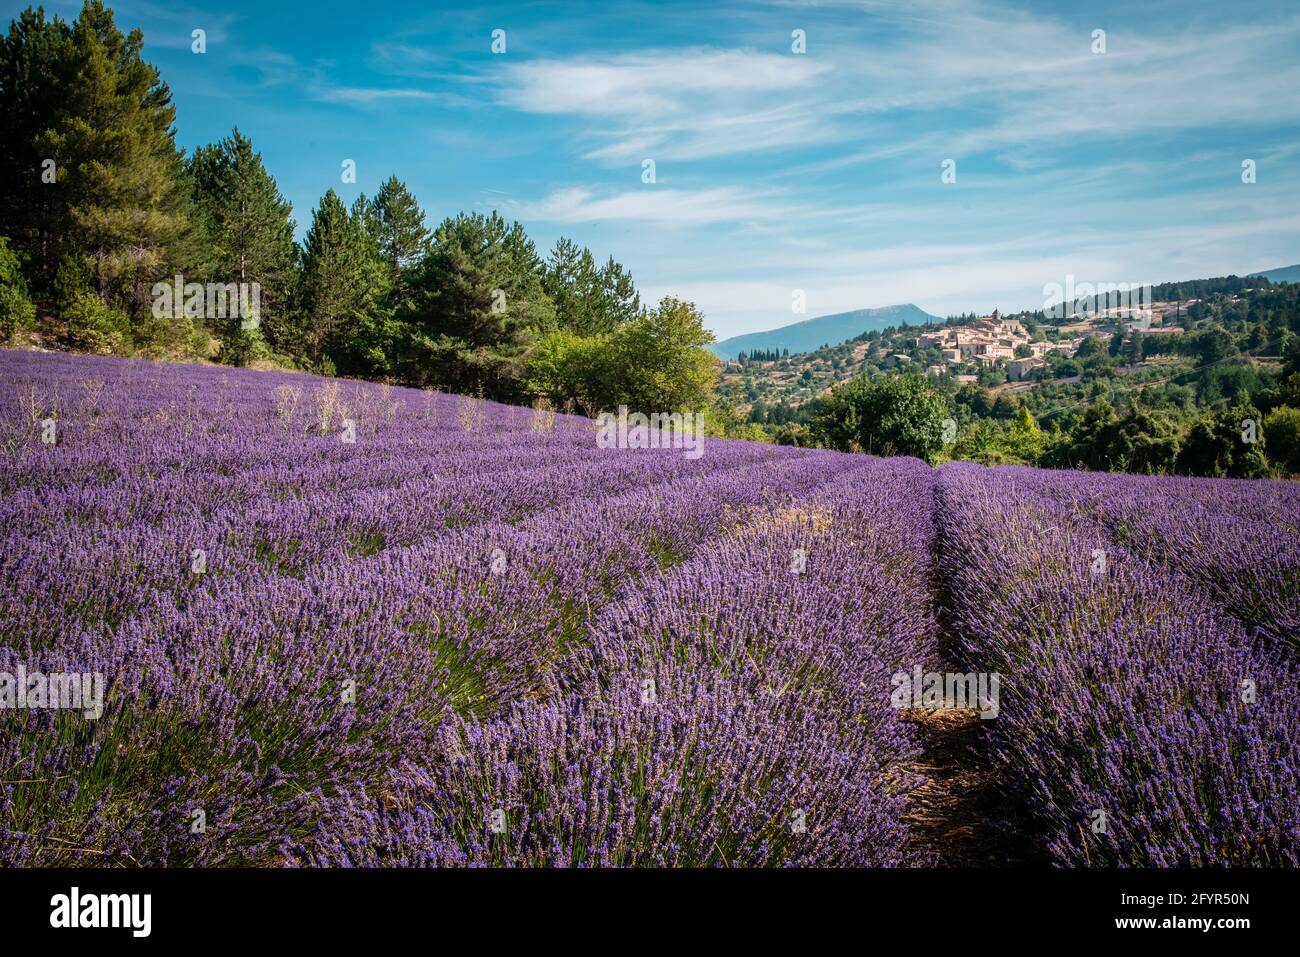 Views of the village of Aurel from a lavender field Stock Photo